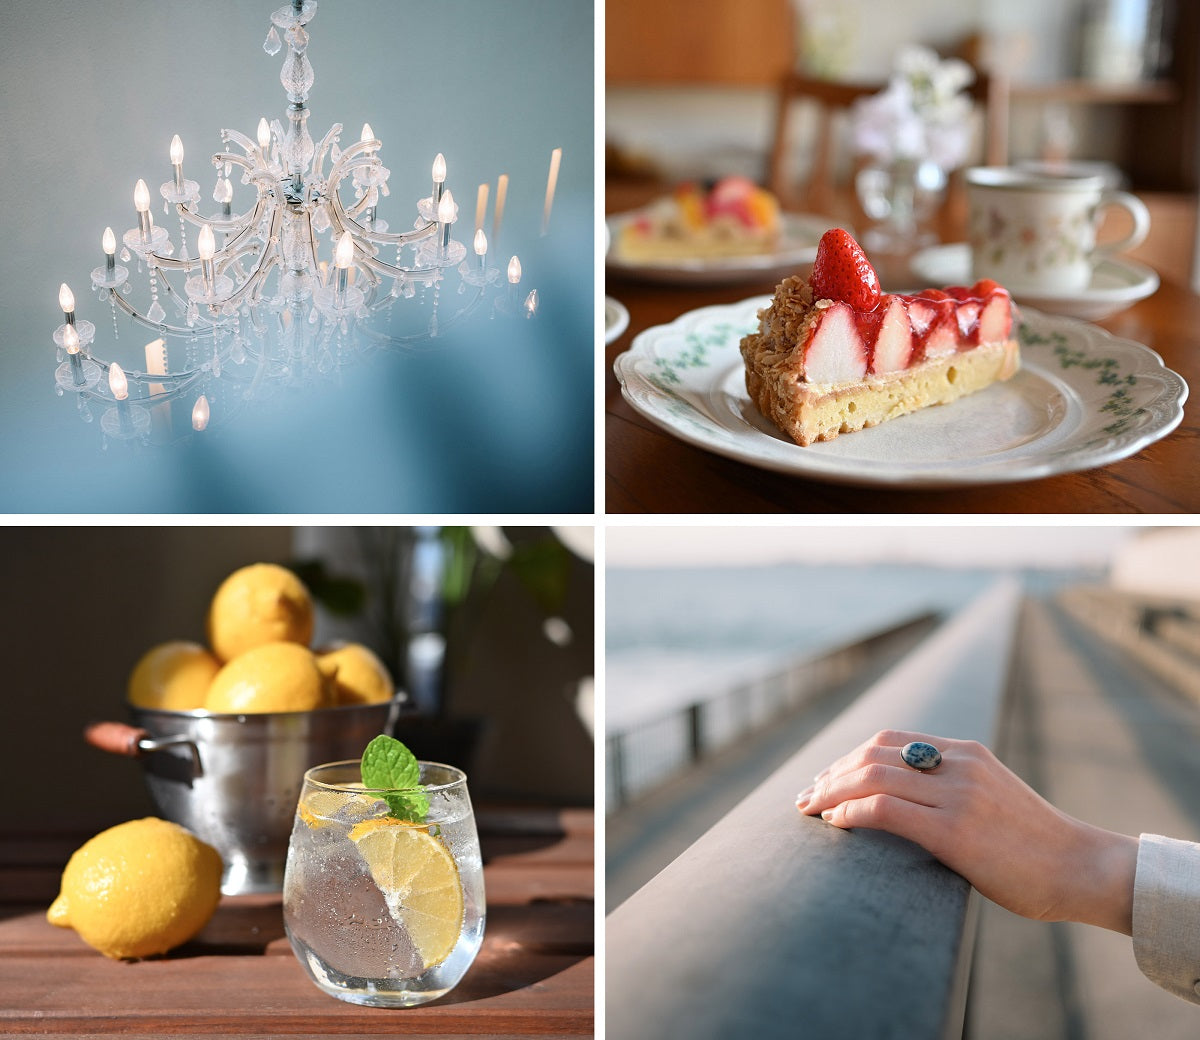 Four shots taken with the NIKKOR Z DX 24mm f/1.7 Lens. They show glass lighting, a cake, the lemons and a glass with wate, and women's hand with a ring on the middle finger.